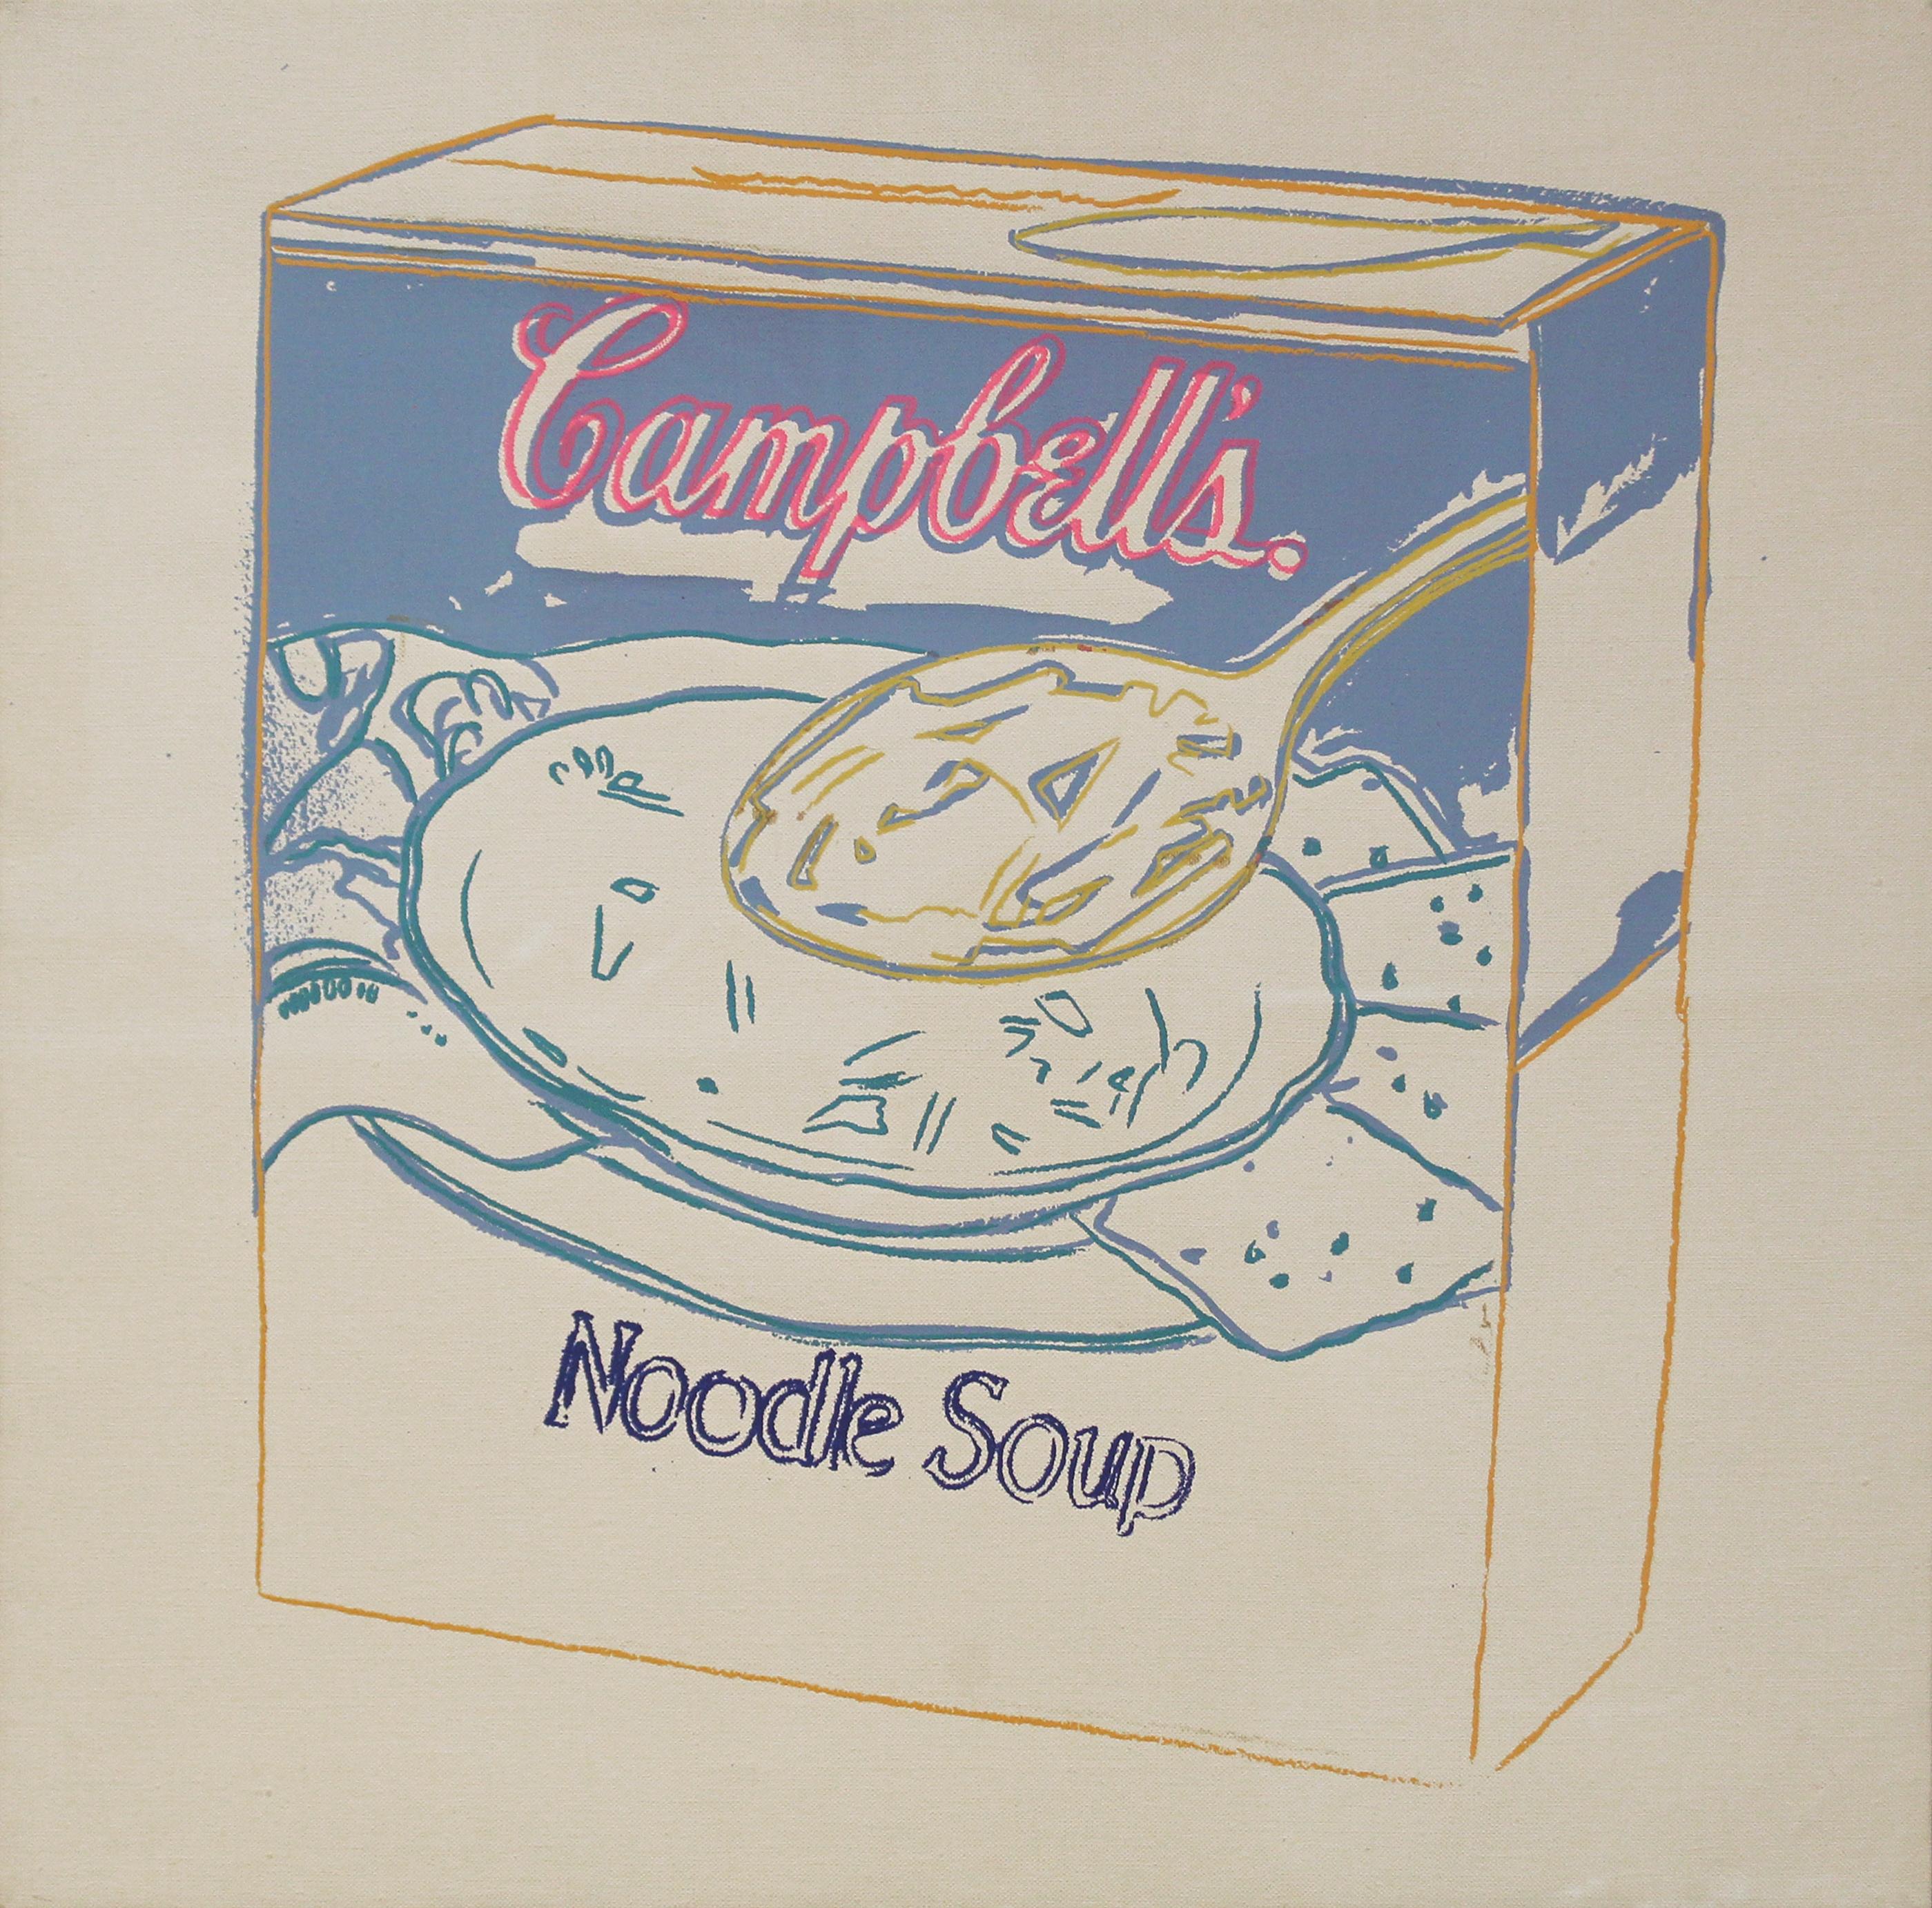 Andy Warhol Abstract Painting - Campbell's Soup Box: Noodle Soup